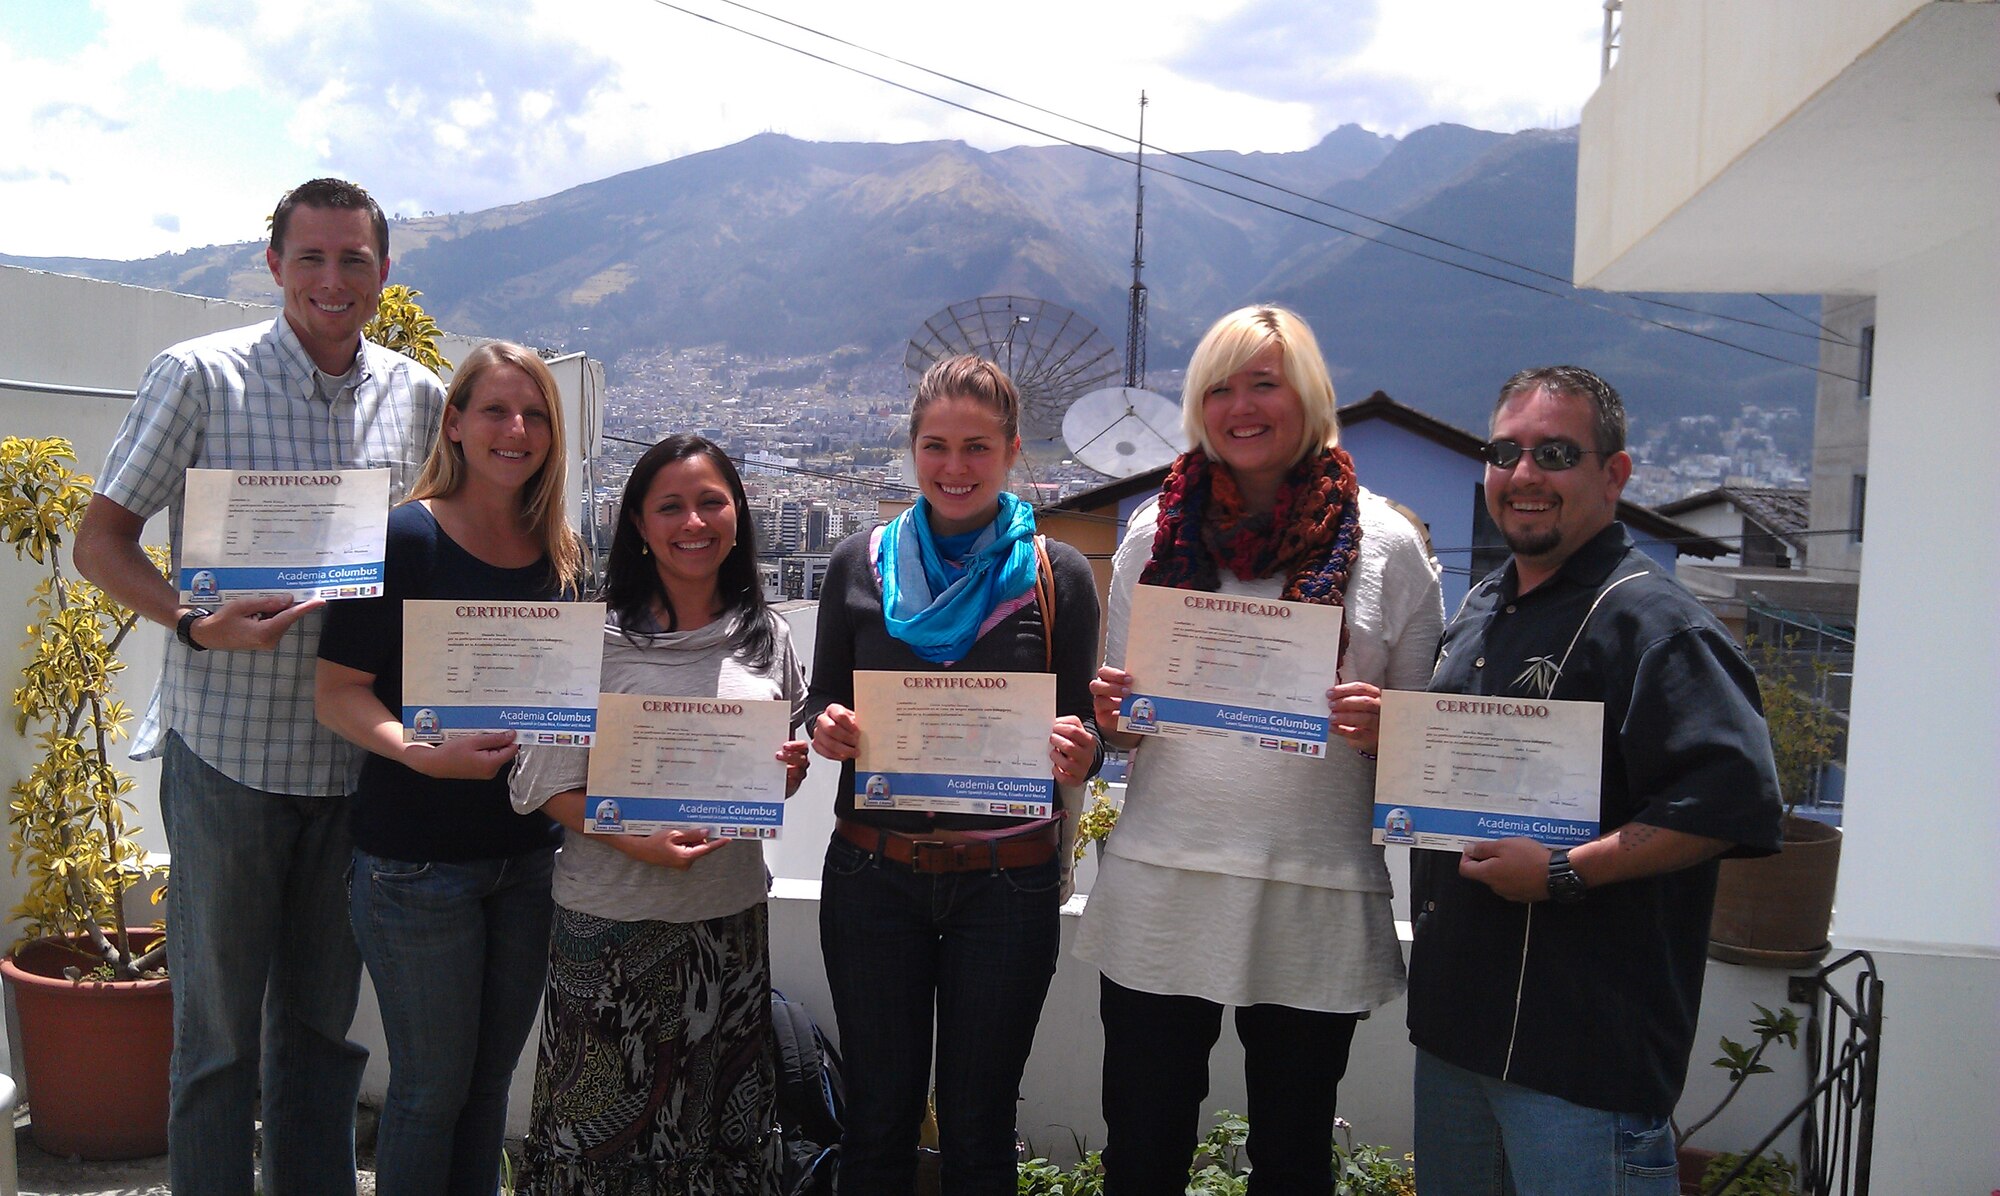 Capt. Kawika Berggren (far right) and fellow Language Enabled Airman Program participants pause for a photo after receiving their certificates of completion for the Language Intensive Training Events program in Ecuador, Sept. 13, 2013. As part of his LEAP training, Berggren traveled to Ecuador to immerse himself in the Latin culture and bolster his language skills. (Courtesy Photo)